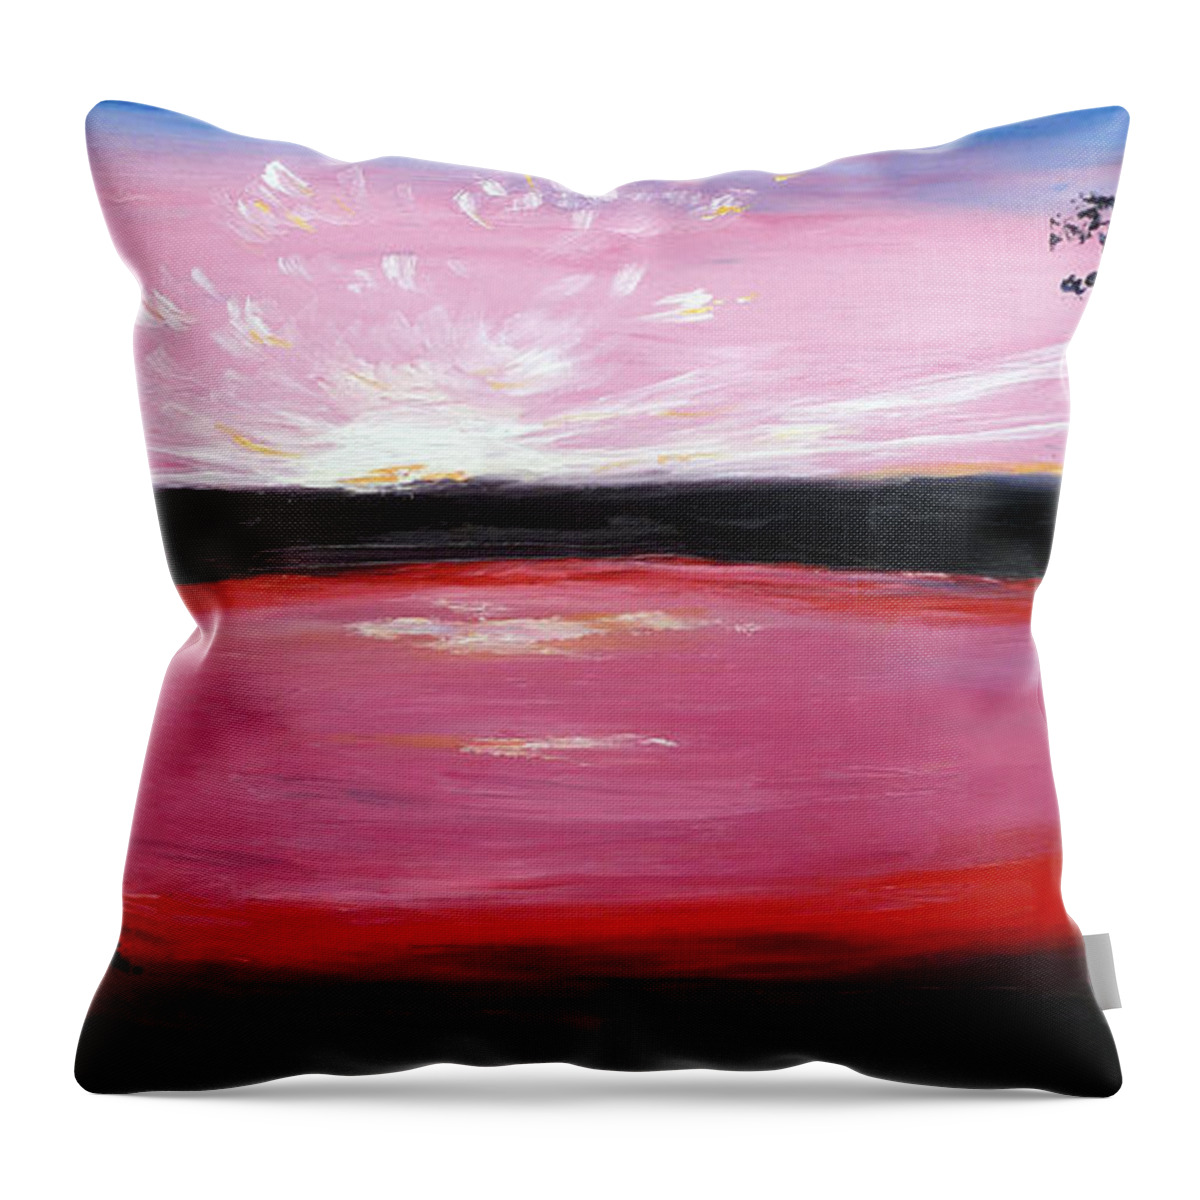 Lake Throw Pillow featuring the painting Vanquished by Meaghan Troup